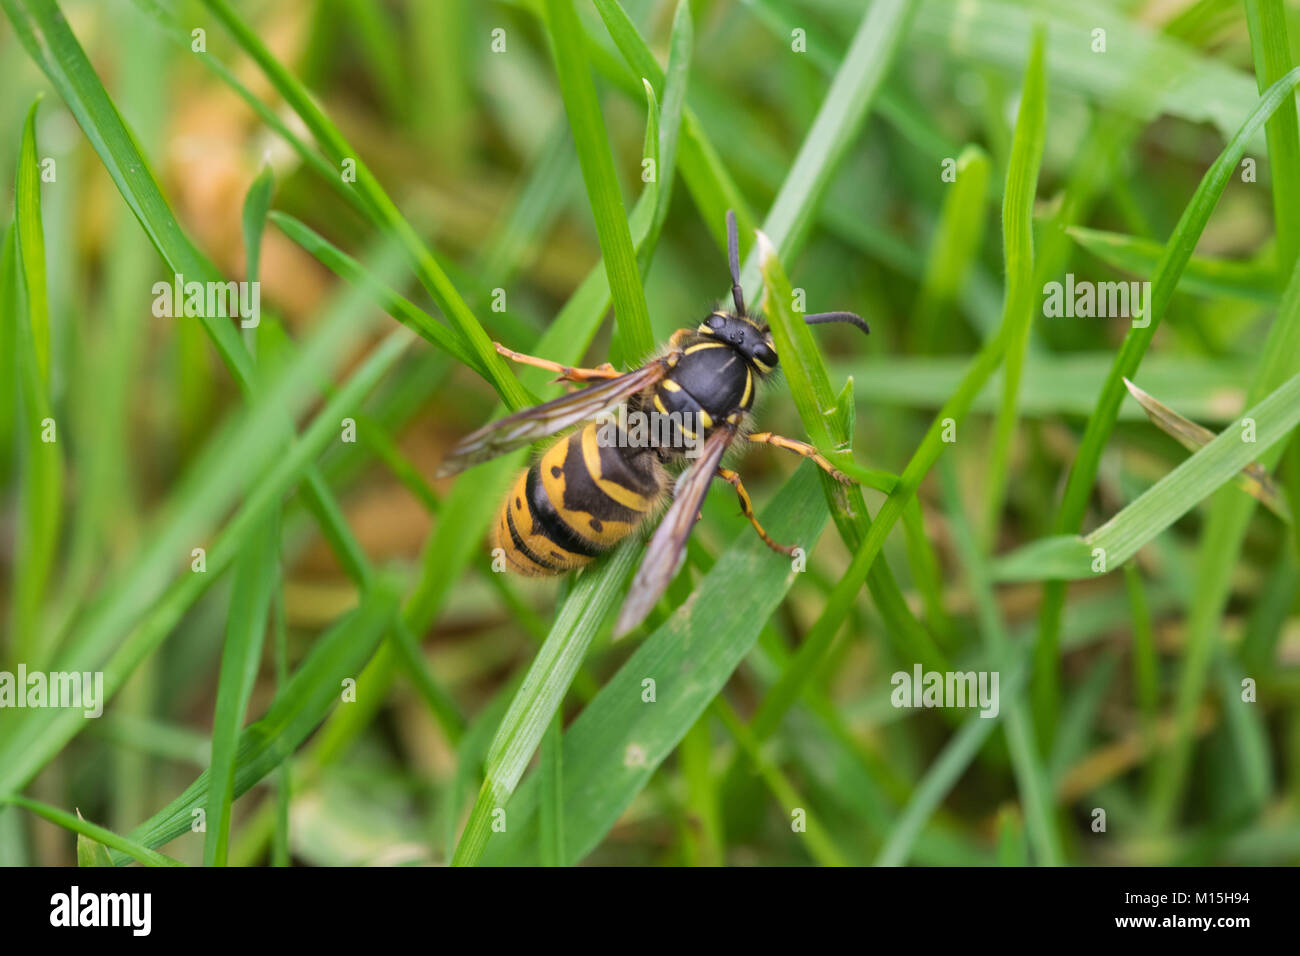 close up of a Wasp trying to climb a blade of grass Stock Photo